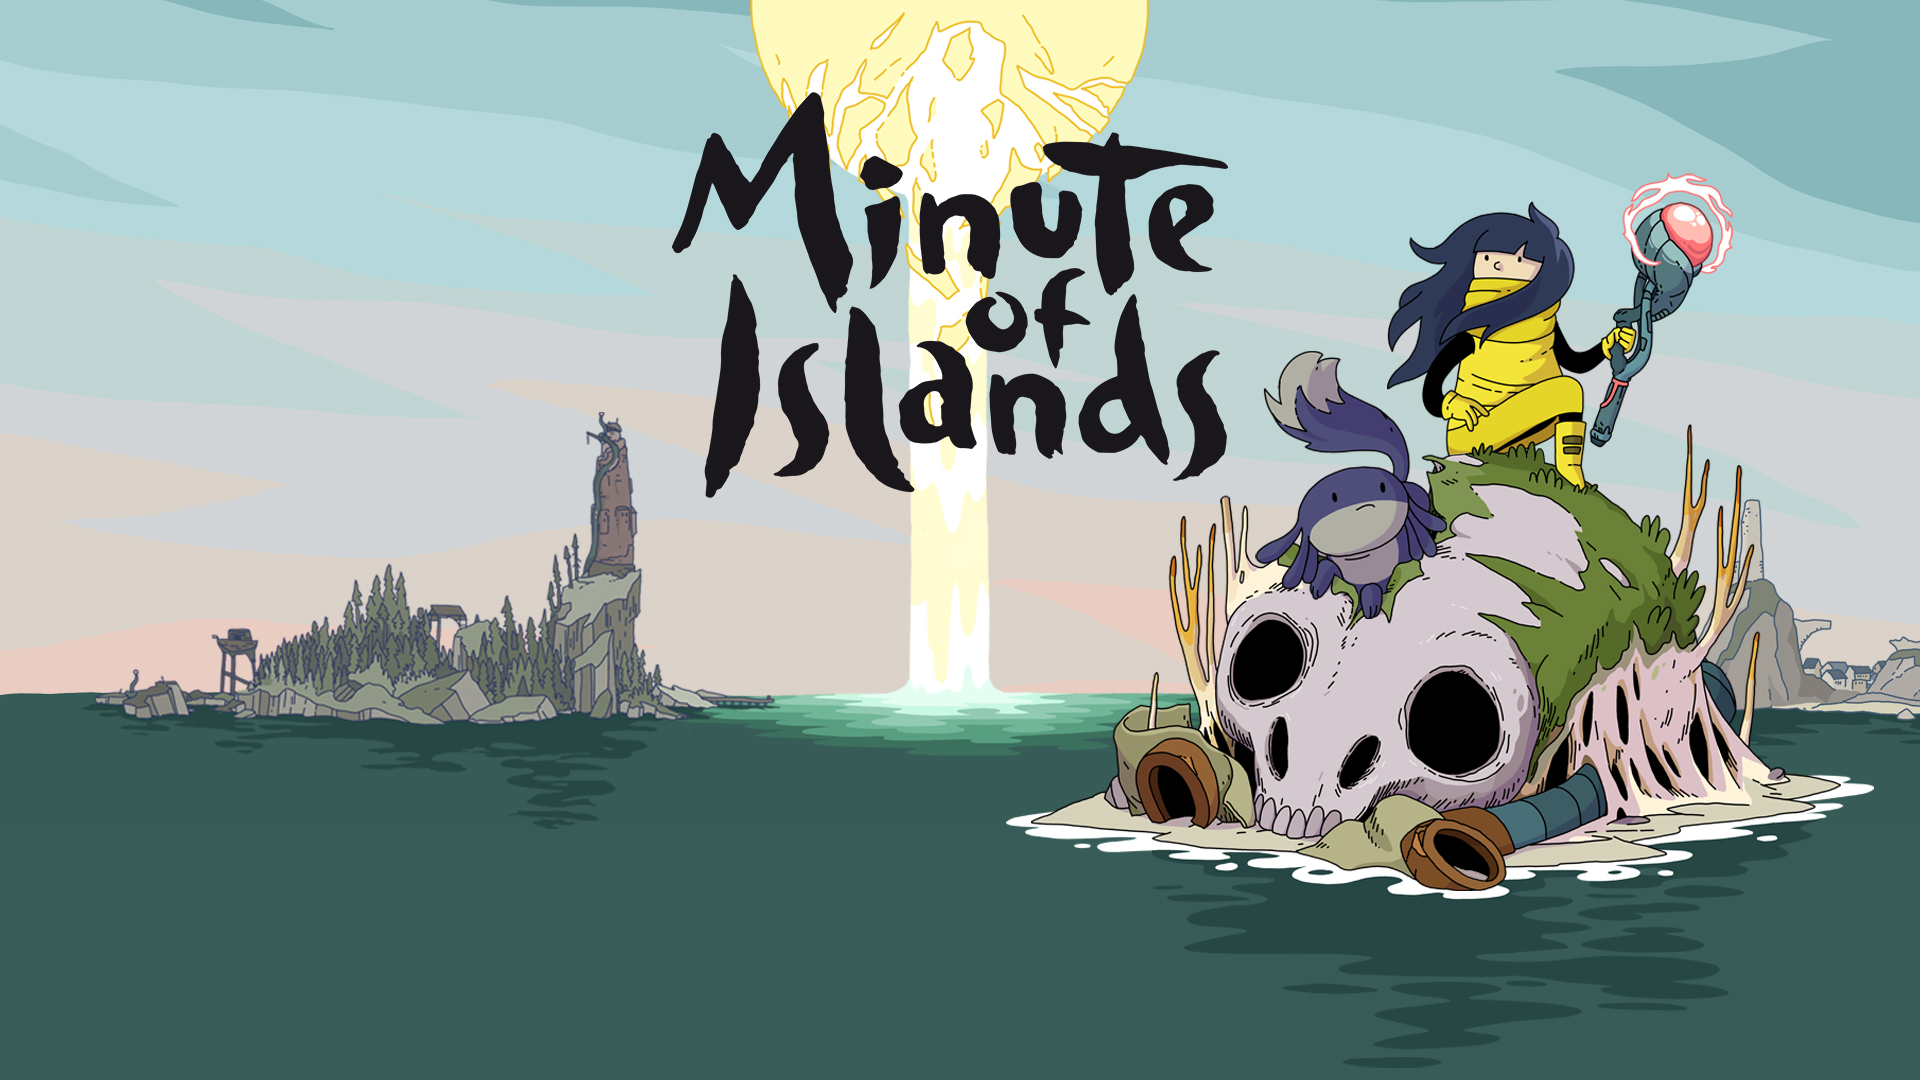 minute of islands review